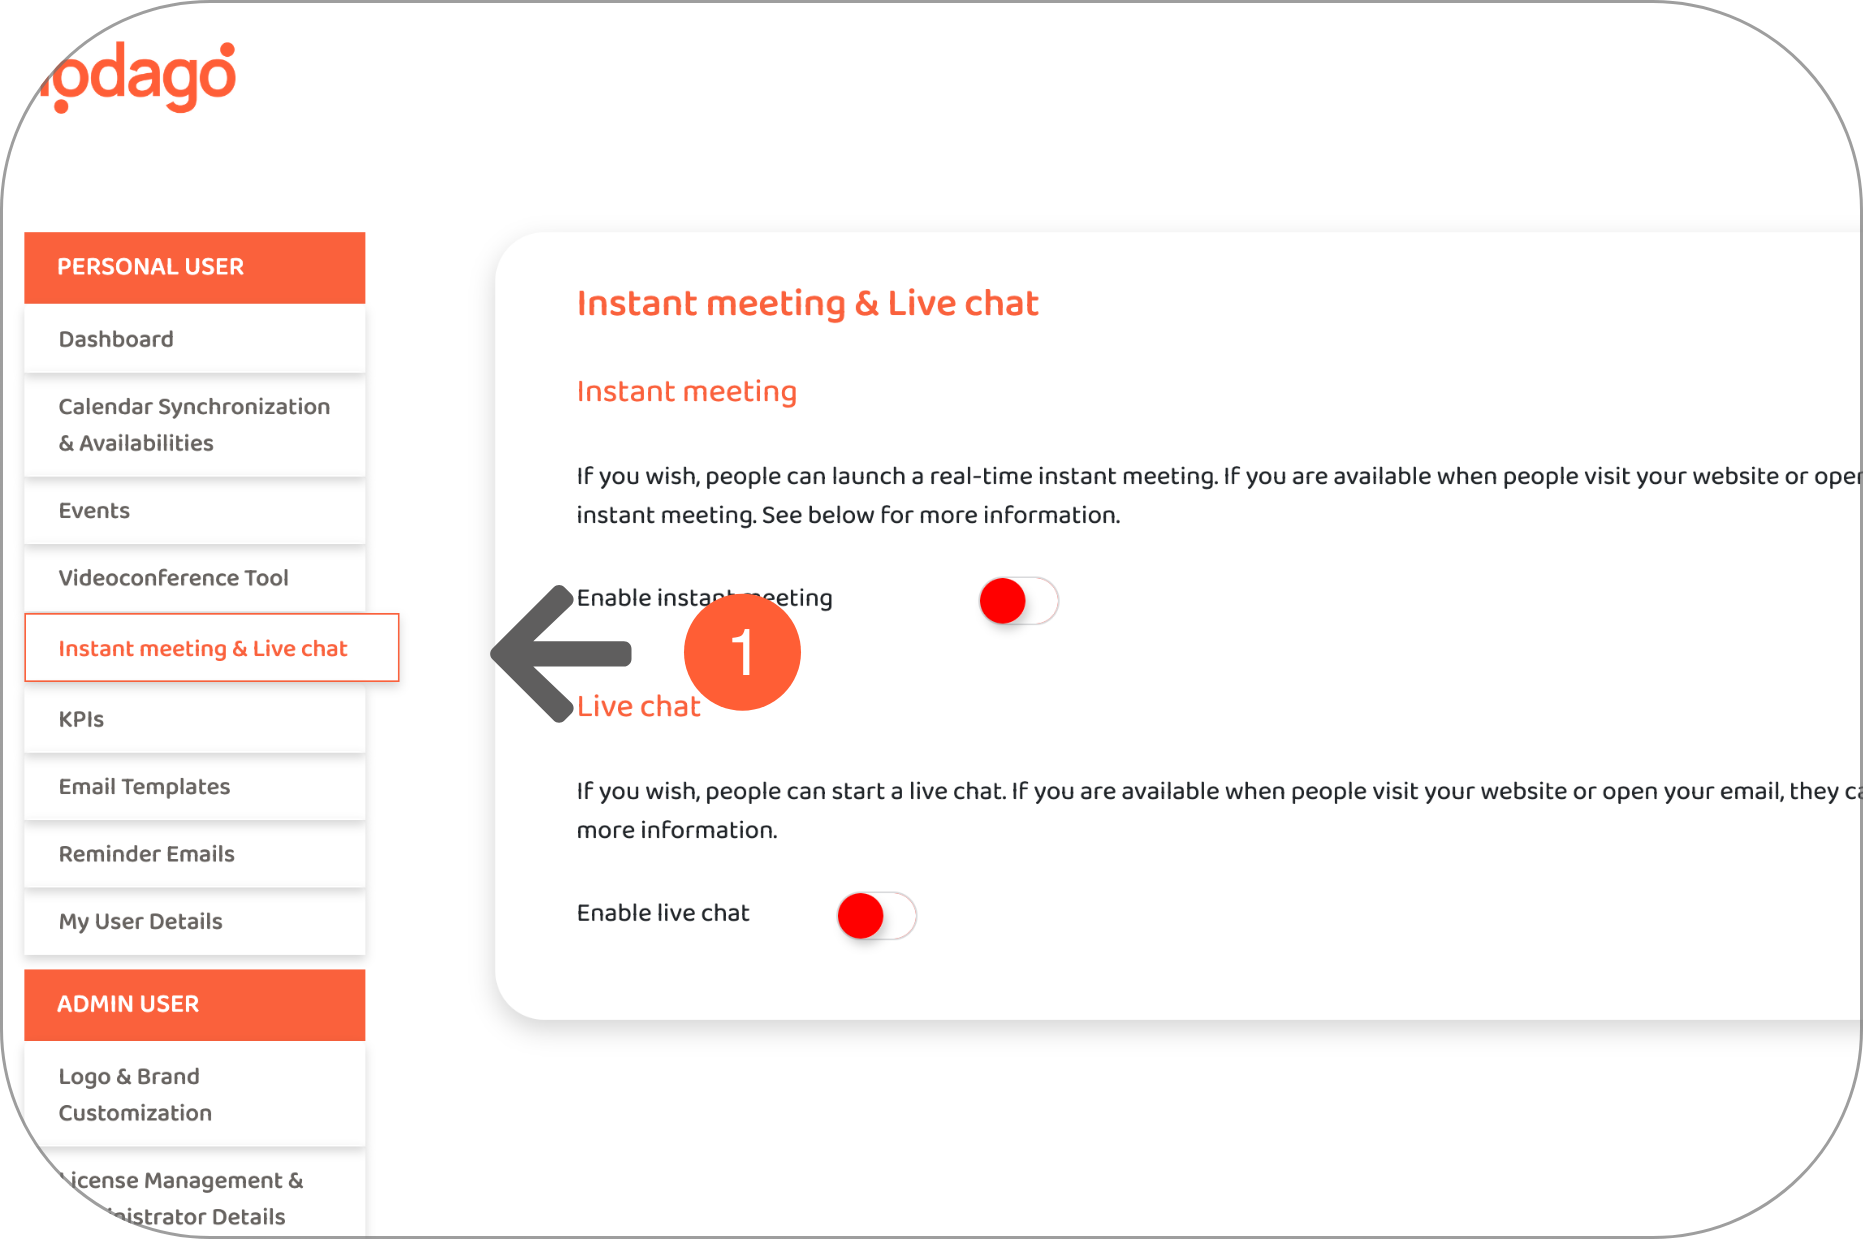 Instant meeting & live chat option